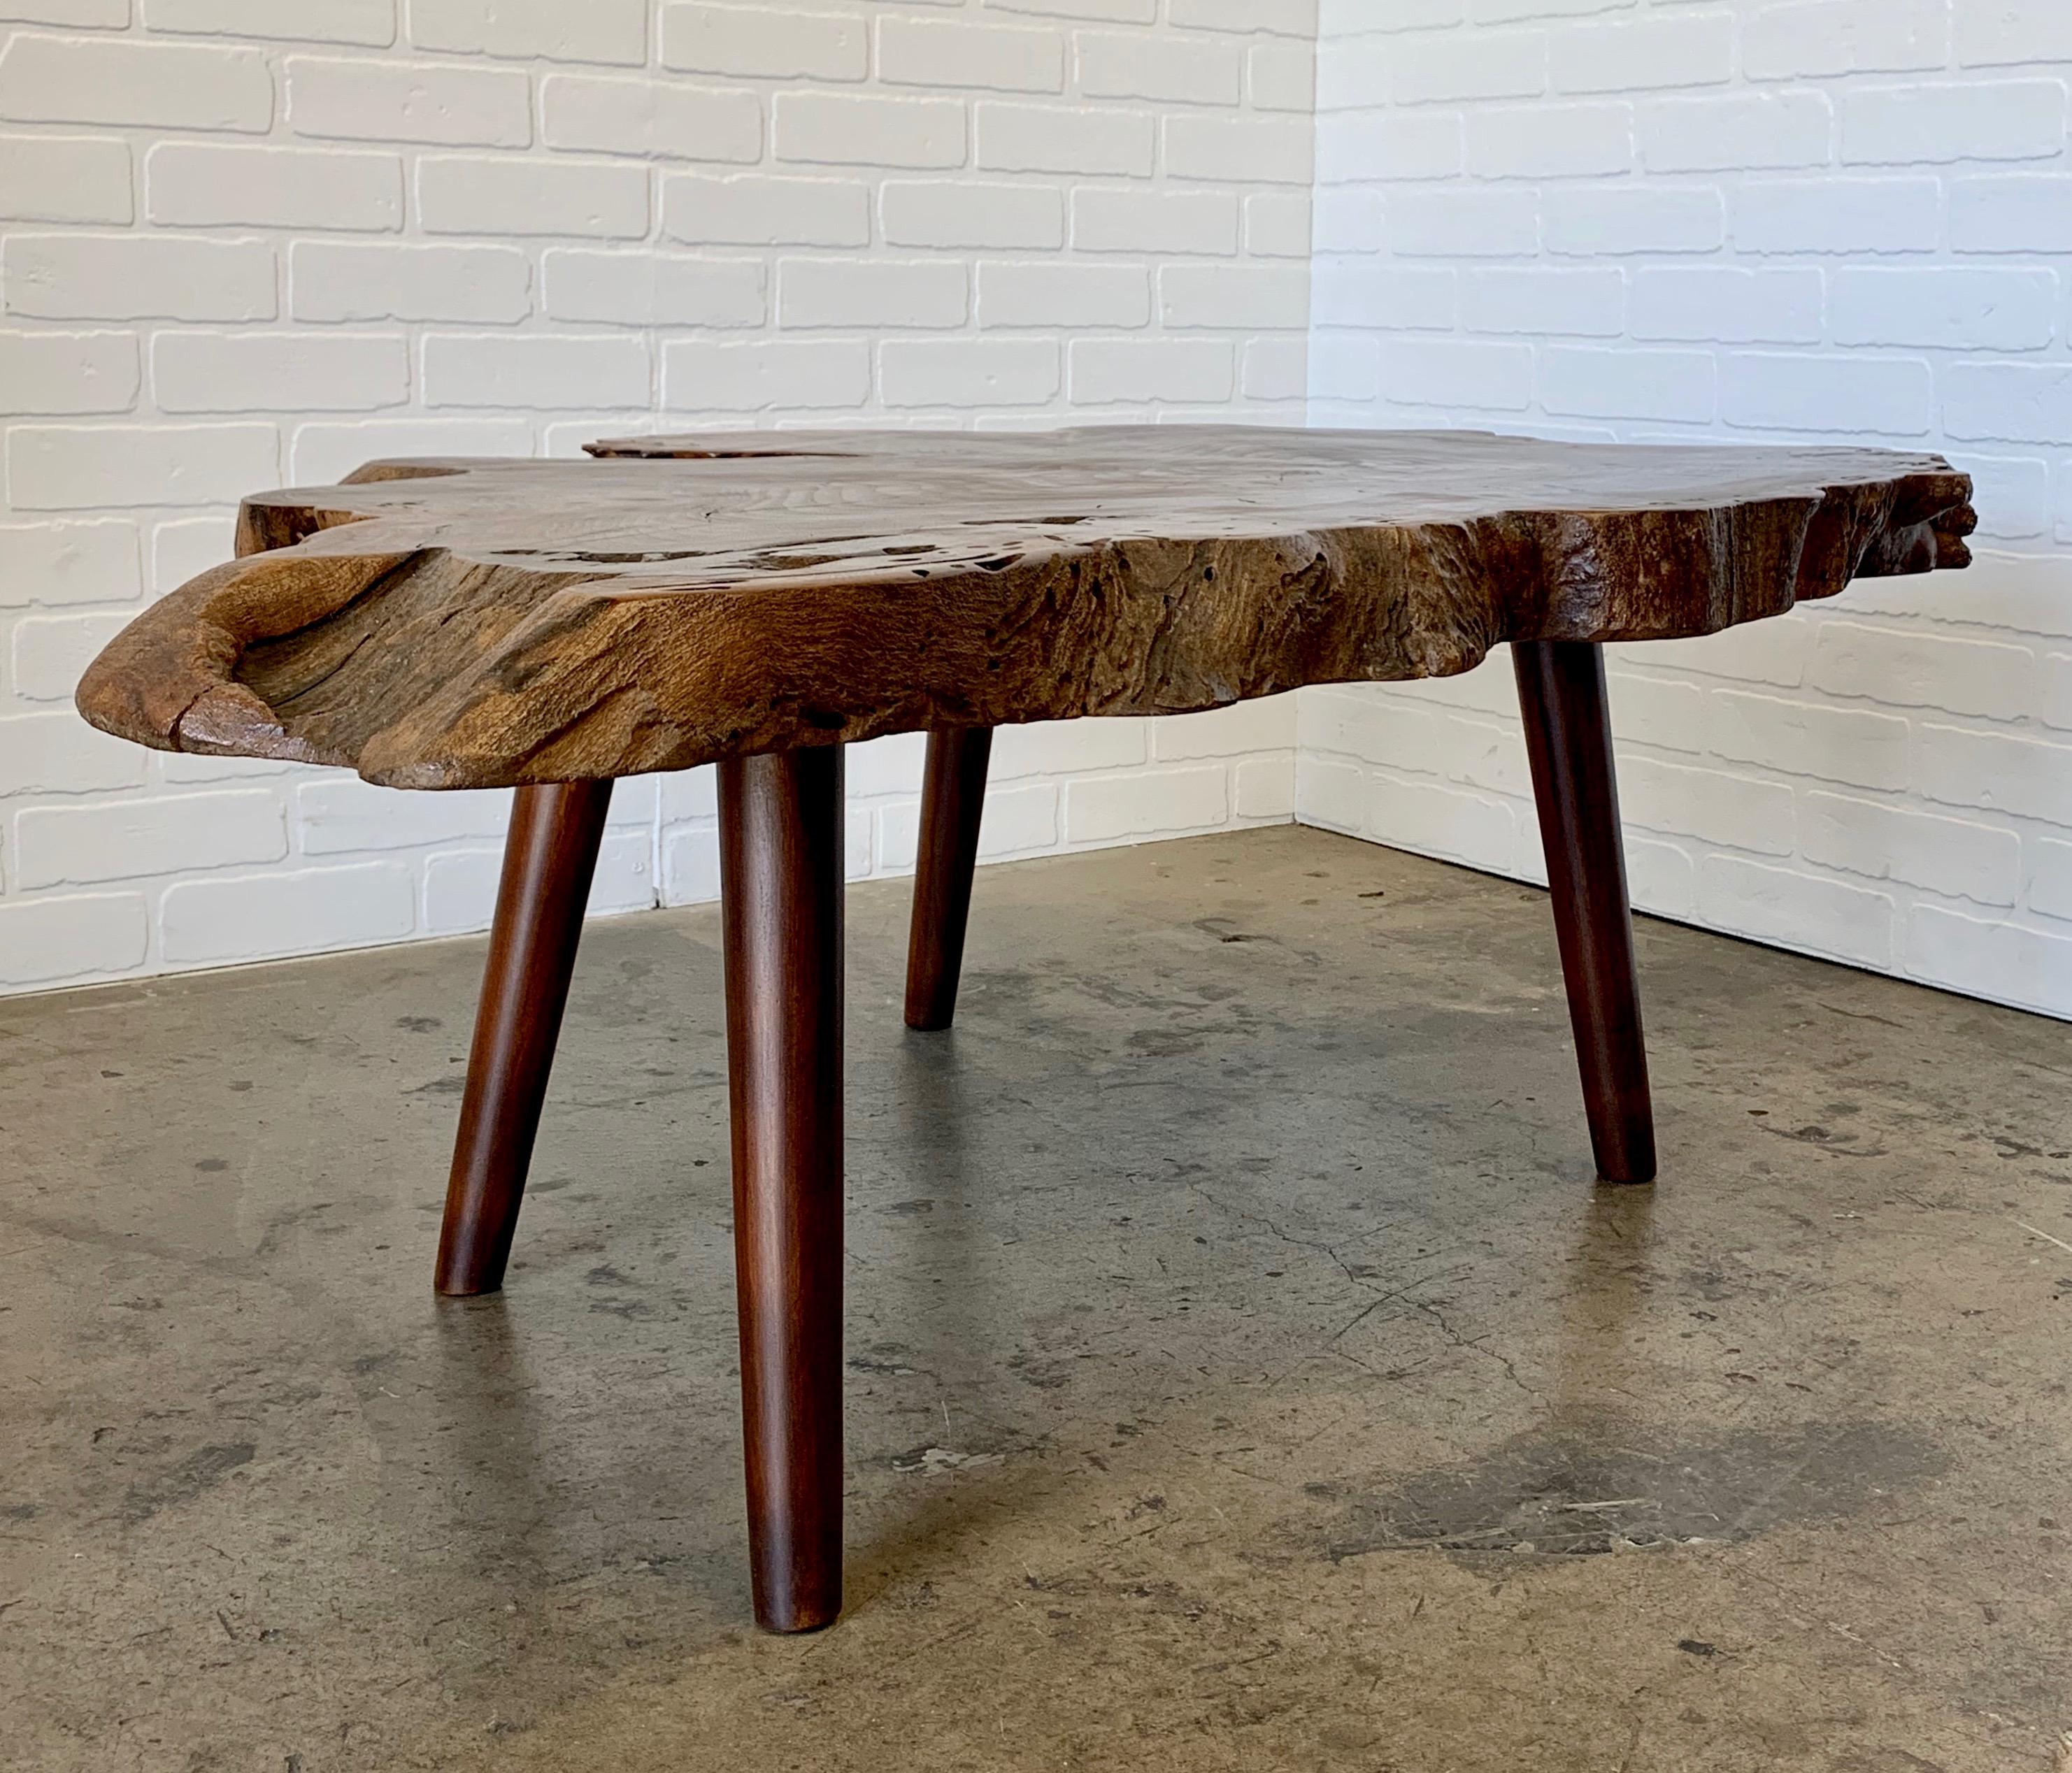 Vintage modern large American walnut slab with extreme burl edge and sprawled legs
Made from vintage items.